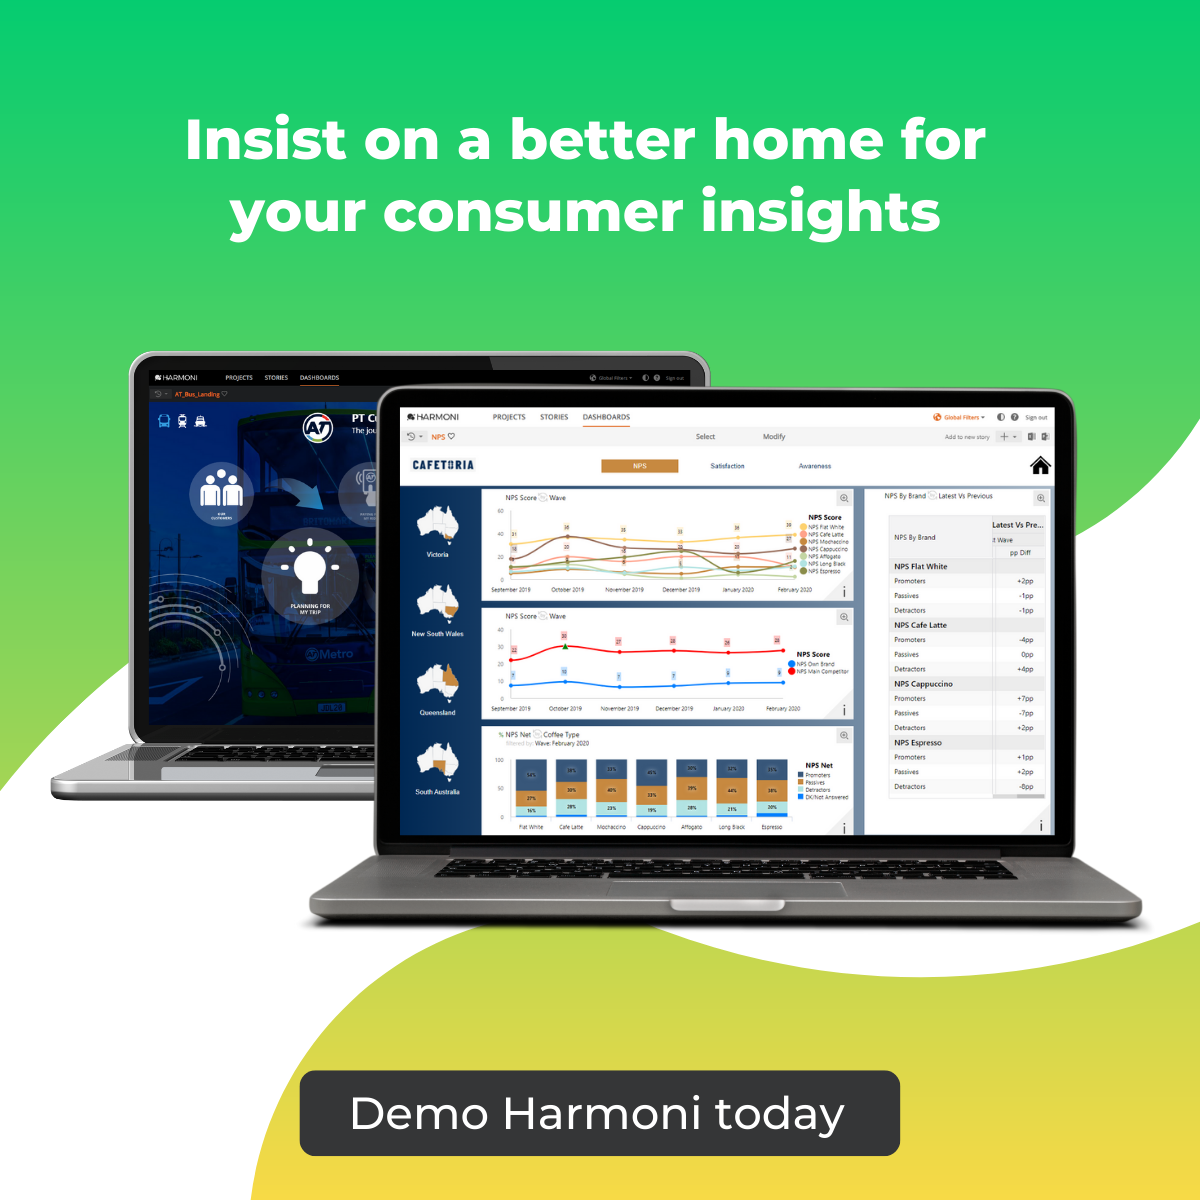 Find out how you can see Harmoni in action today